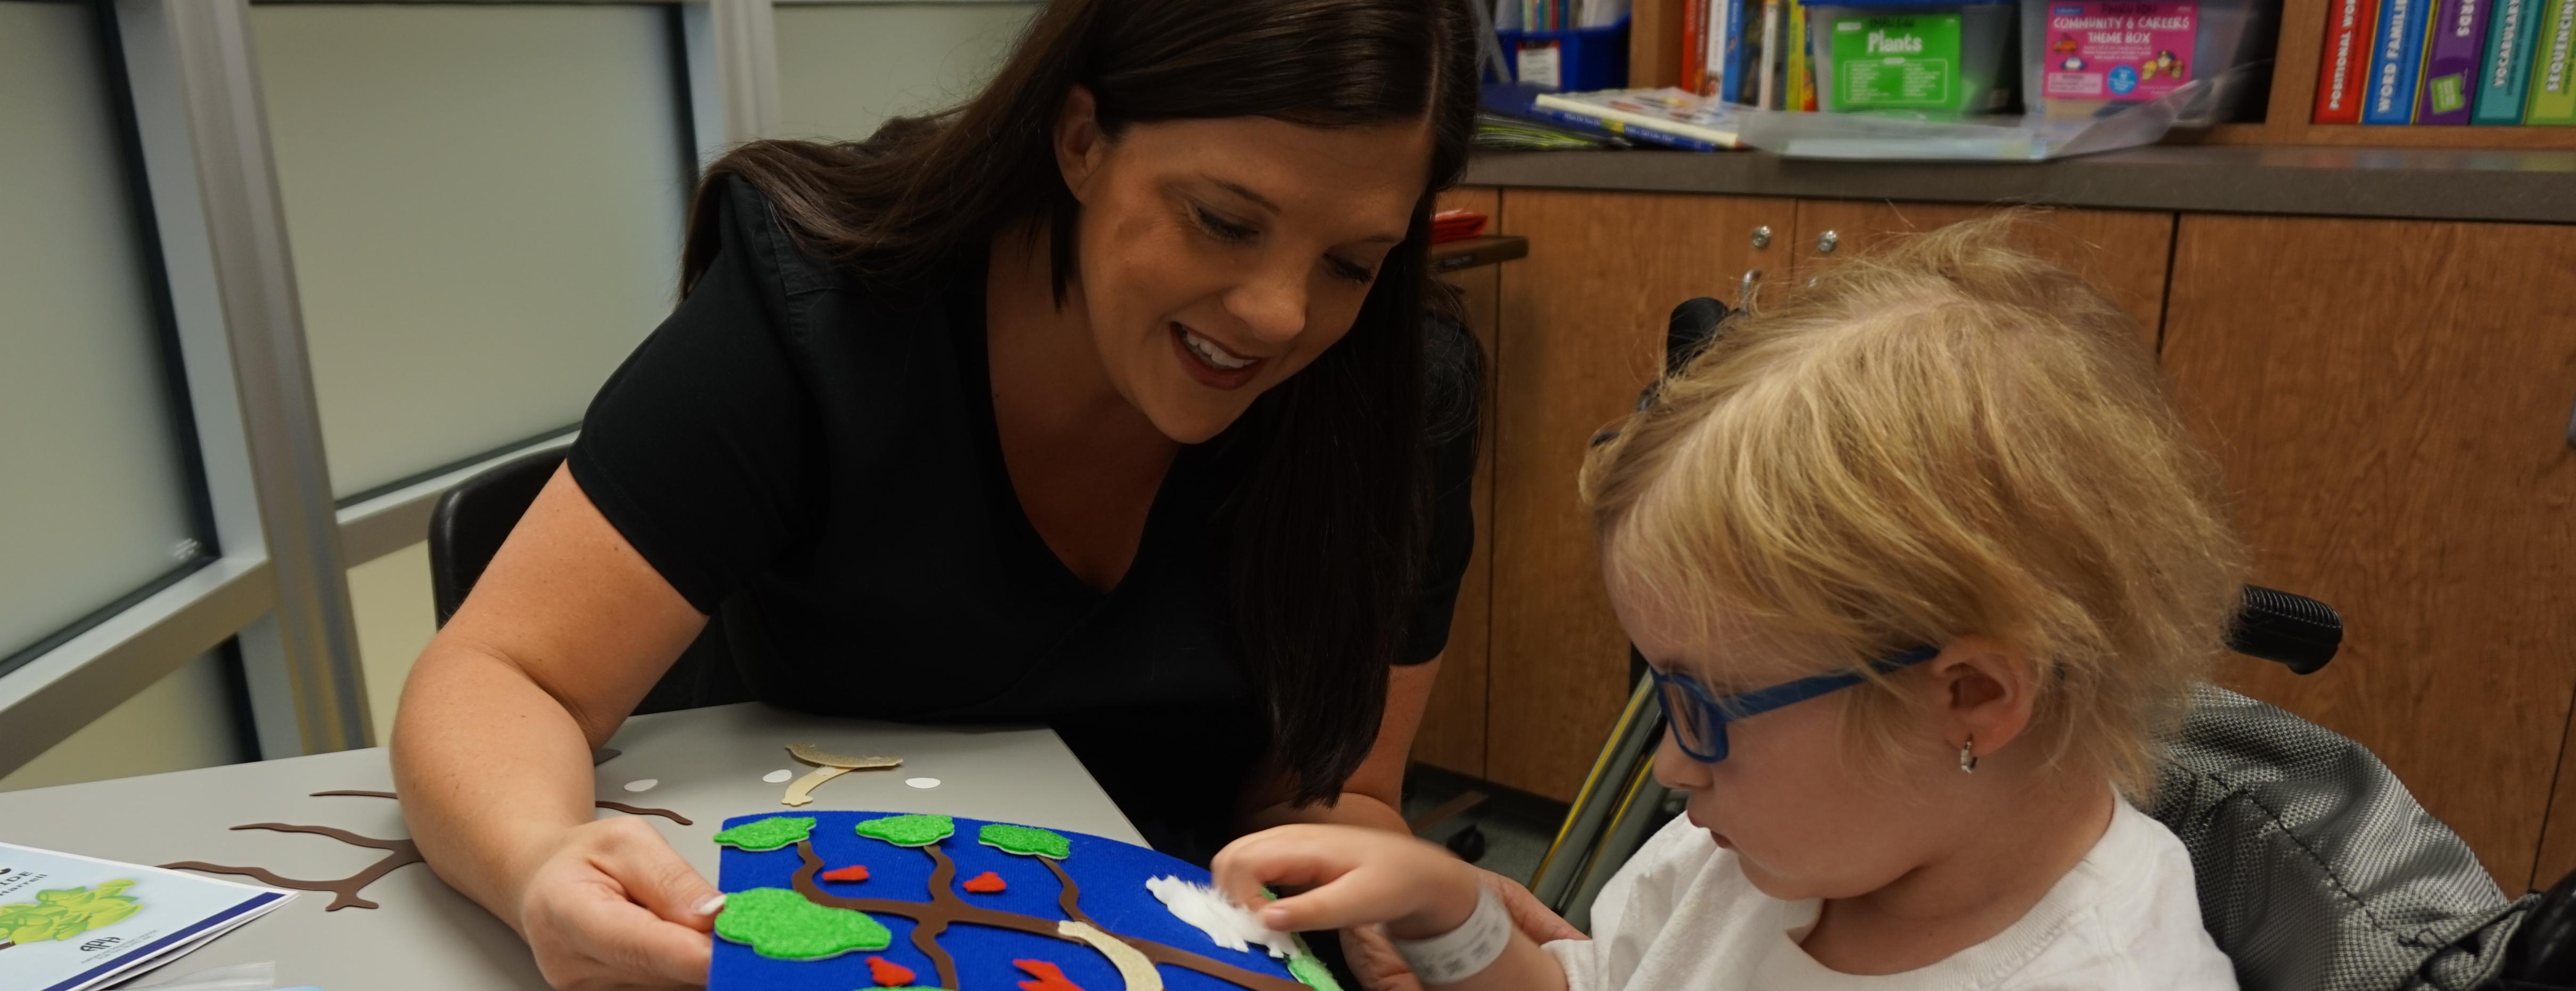 From Hospital to School: Transitioning back to the classroom